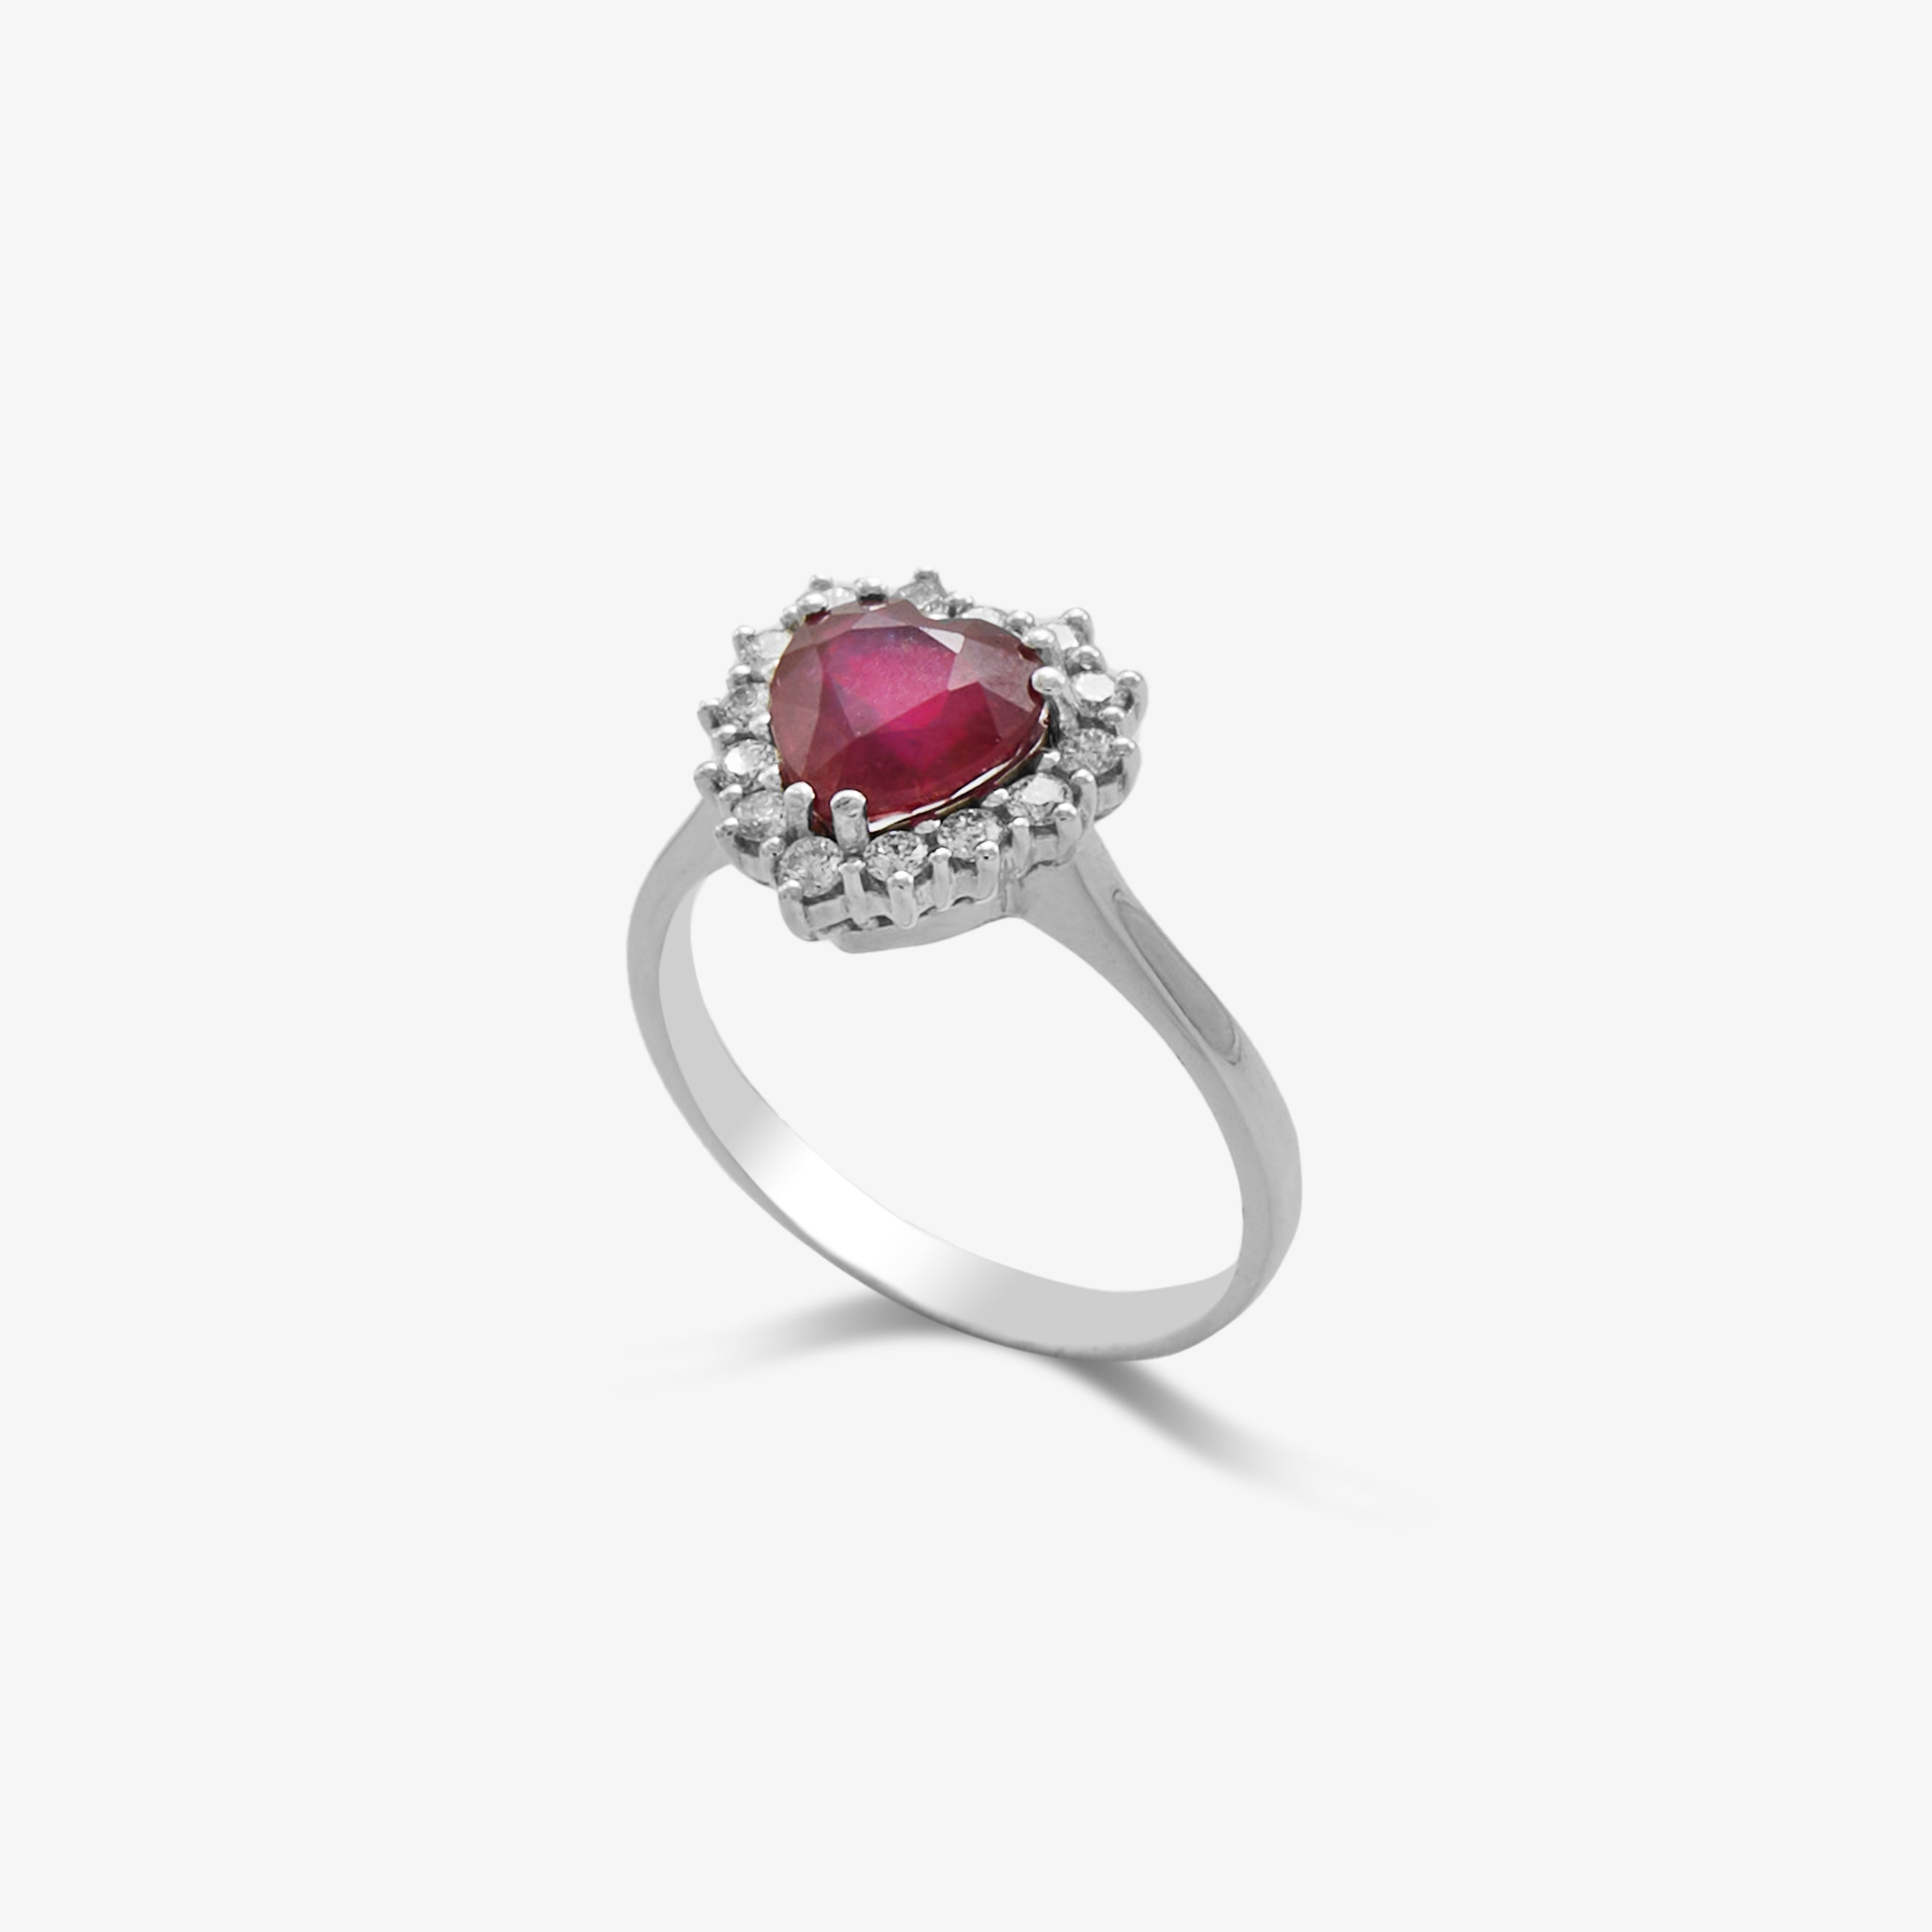 HEART RING WITH RUBY AND DIAMONDS